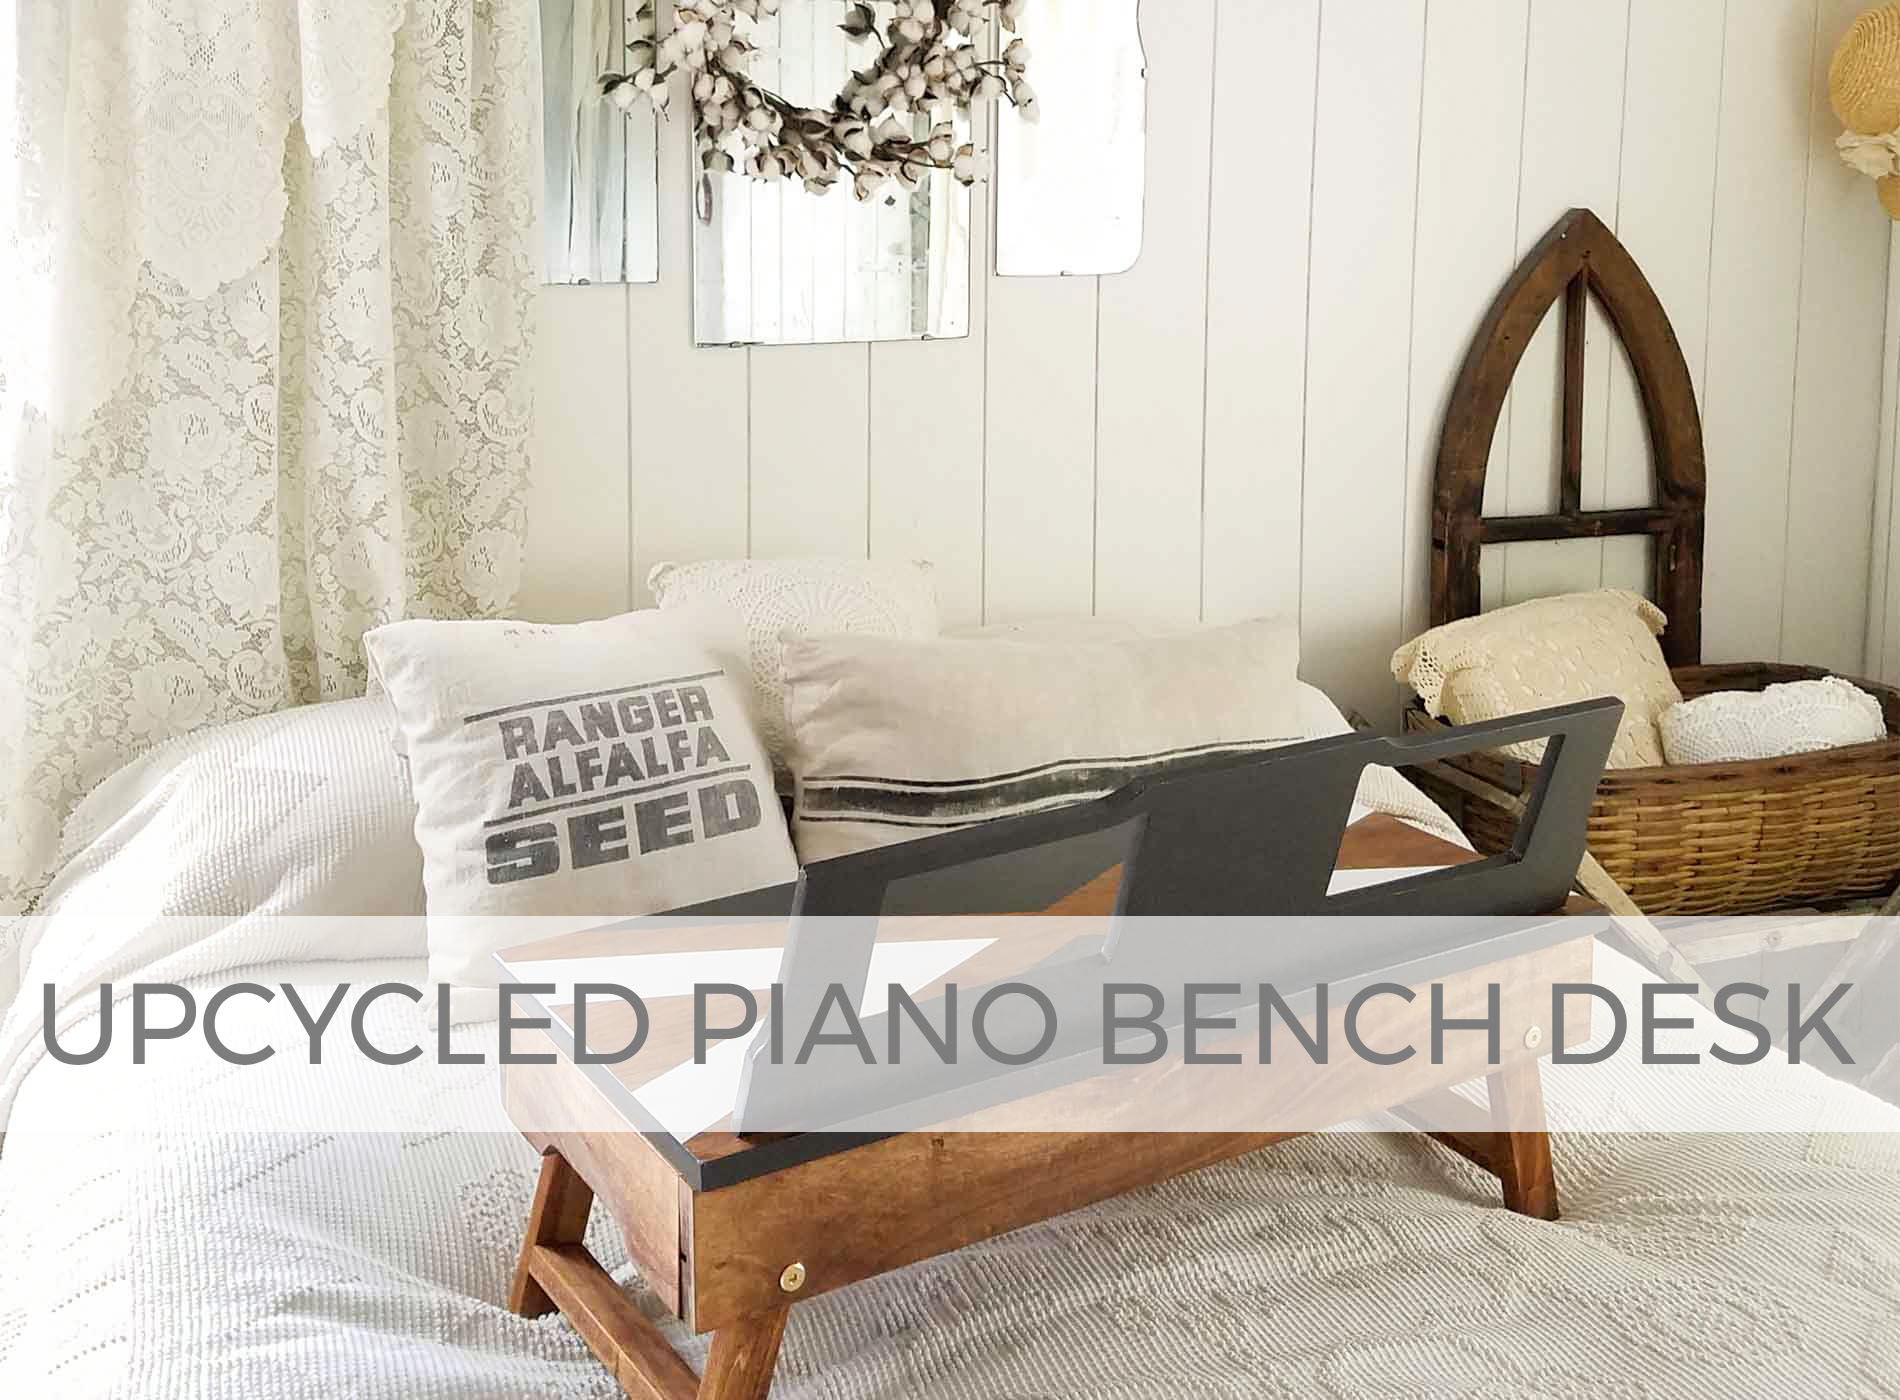 Upcycled Piano Bench into Lap Desk by Larissa of Prodigal Pieces | prodigalpieces.com